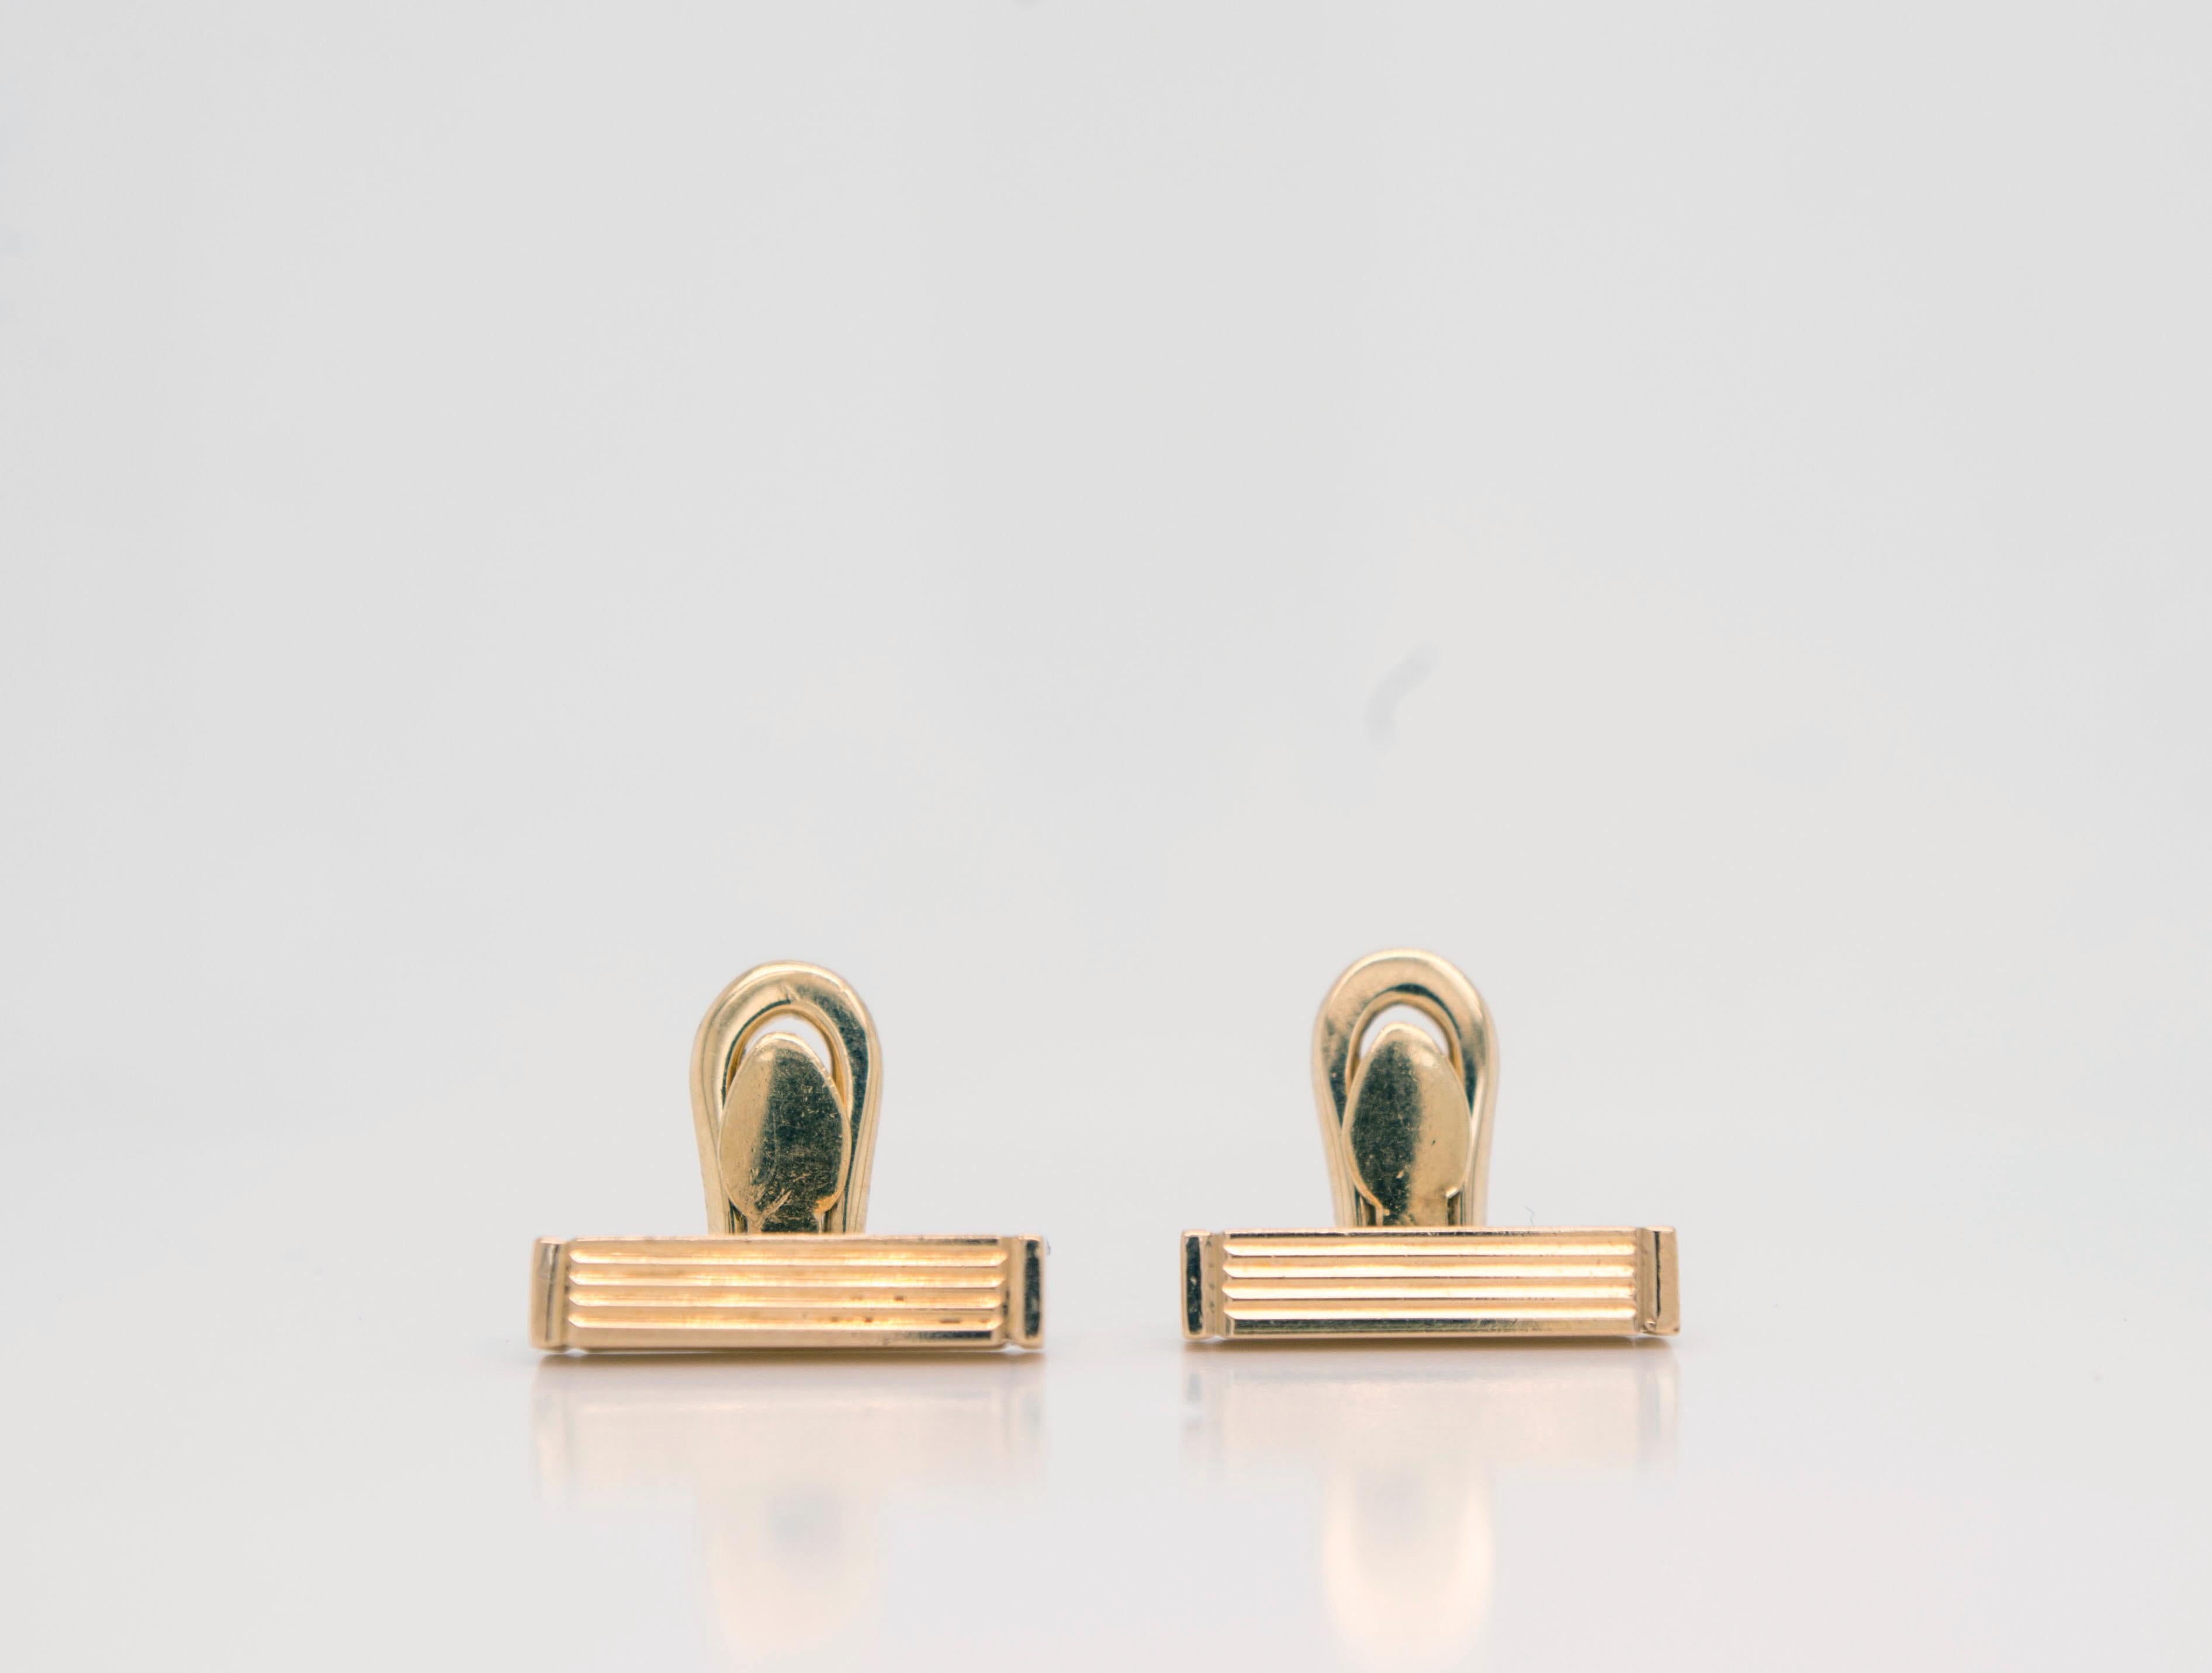 Vintage Gucci 18 Karat Gold Bar Cufflinks

Finish off your black-tie look sporting these Iconic Gucci bar cufflinks in 18k gold featuring a multi-line motif.
Dimensions:14mm x 3.10mm
Stamped ITALY GUCCI 750